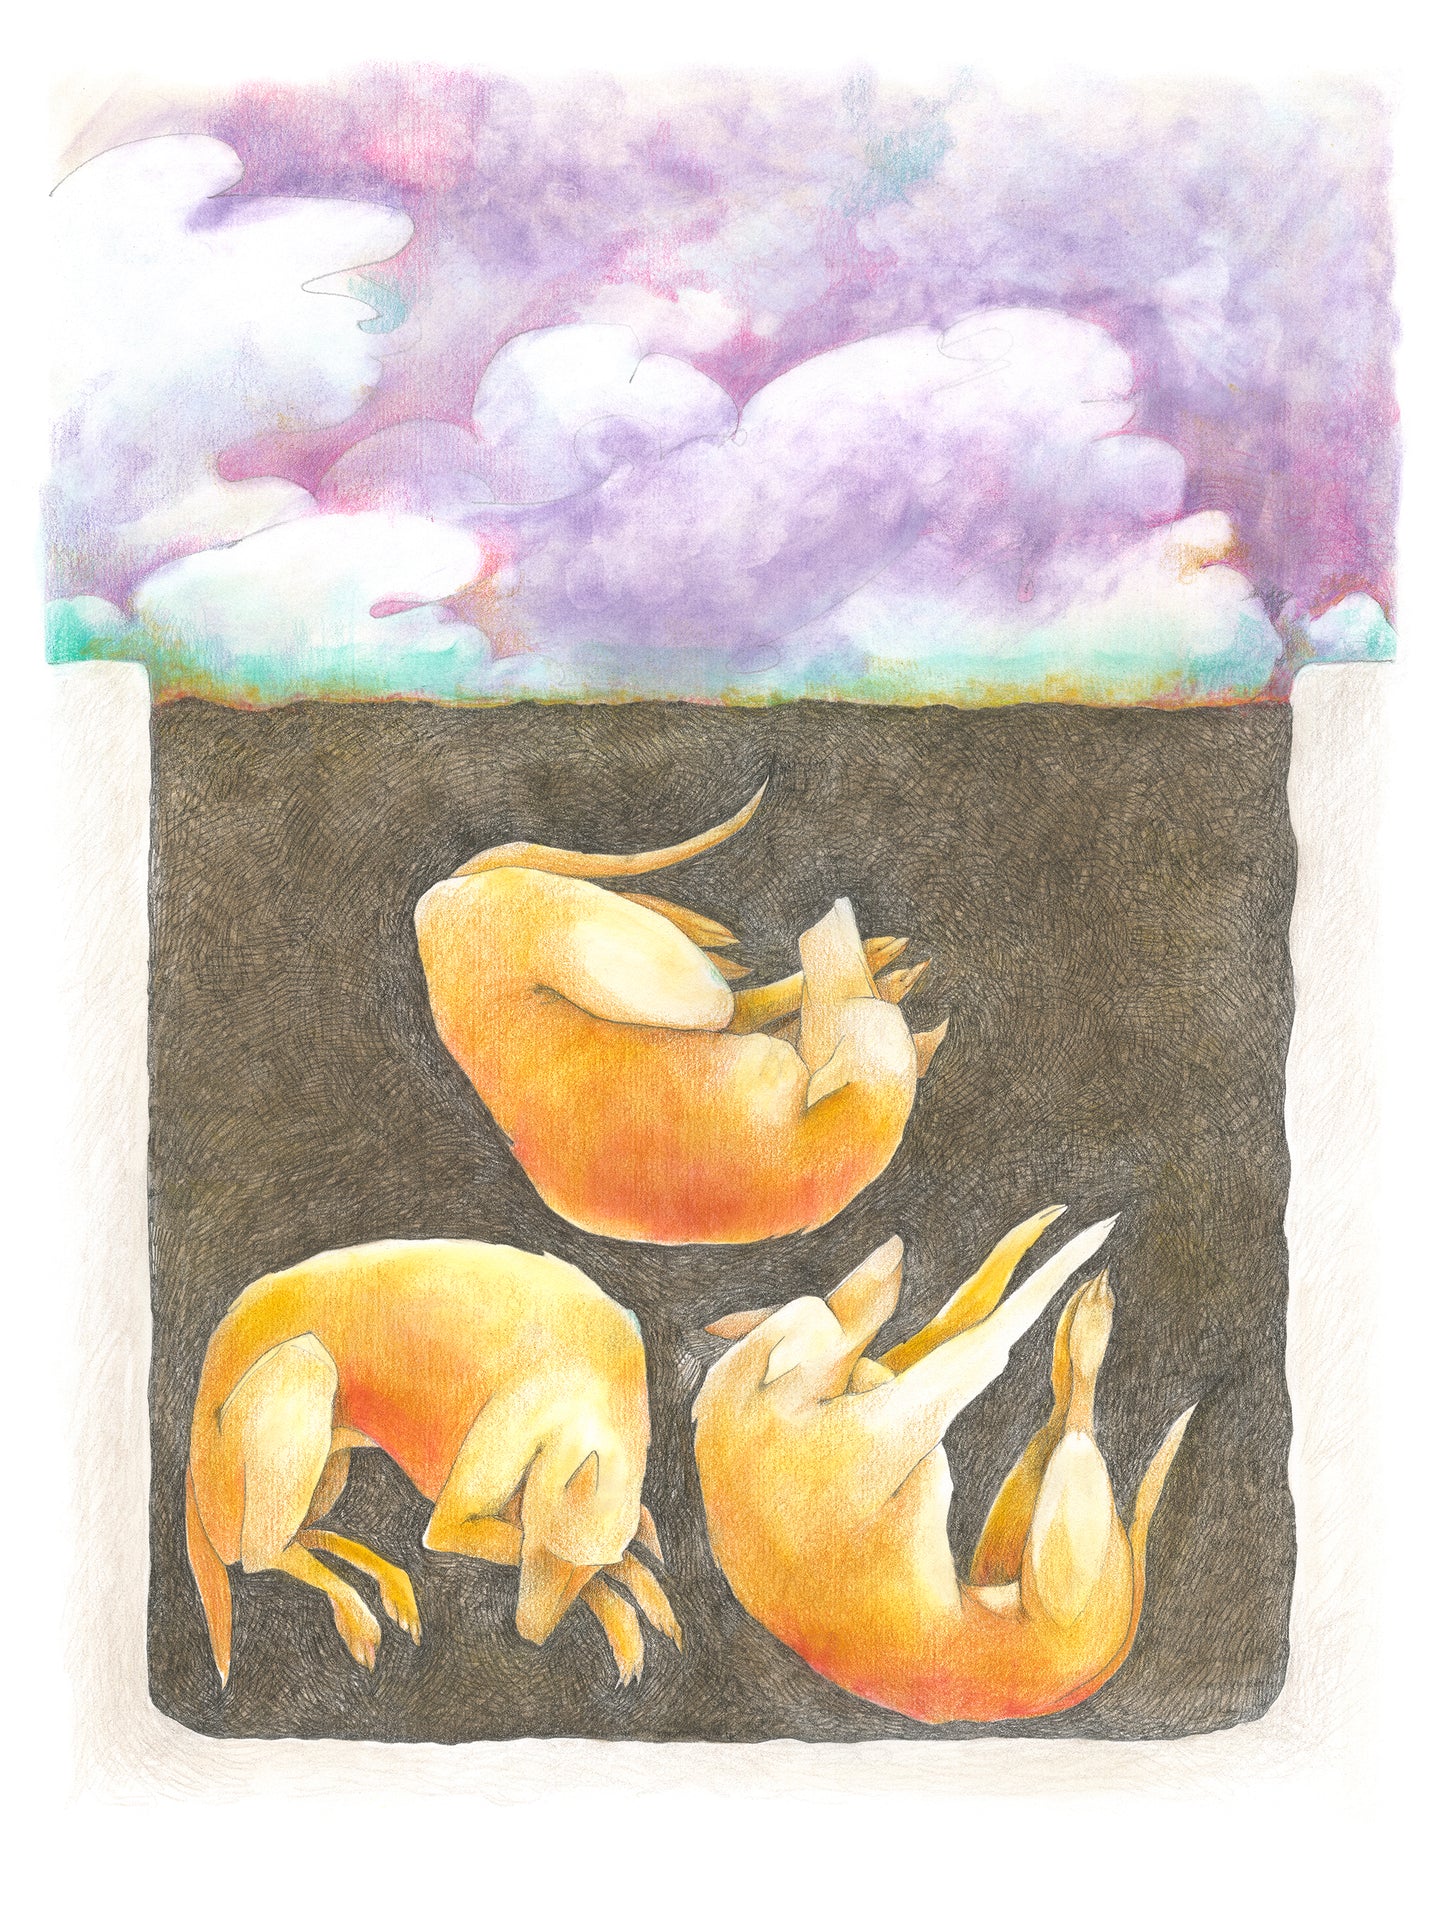 Surreal colored pencil drawings of three orange dogs sleeping underground below a cloudy sky.